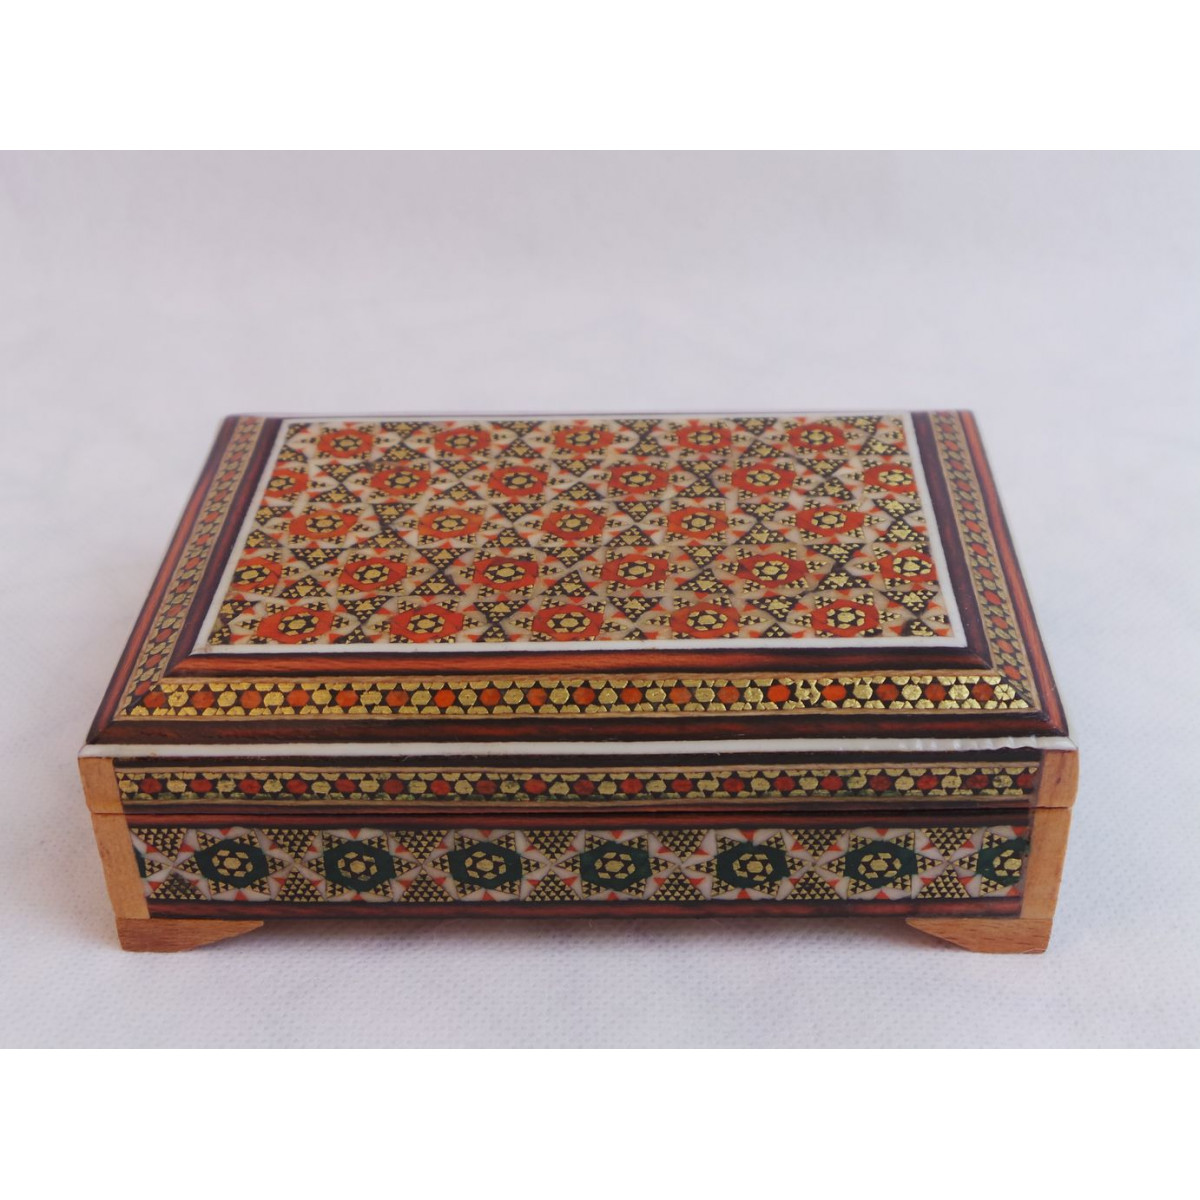 Wood and Copper Inlaying Jewelry Box - HKH3010-Persian Handicrafts